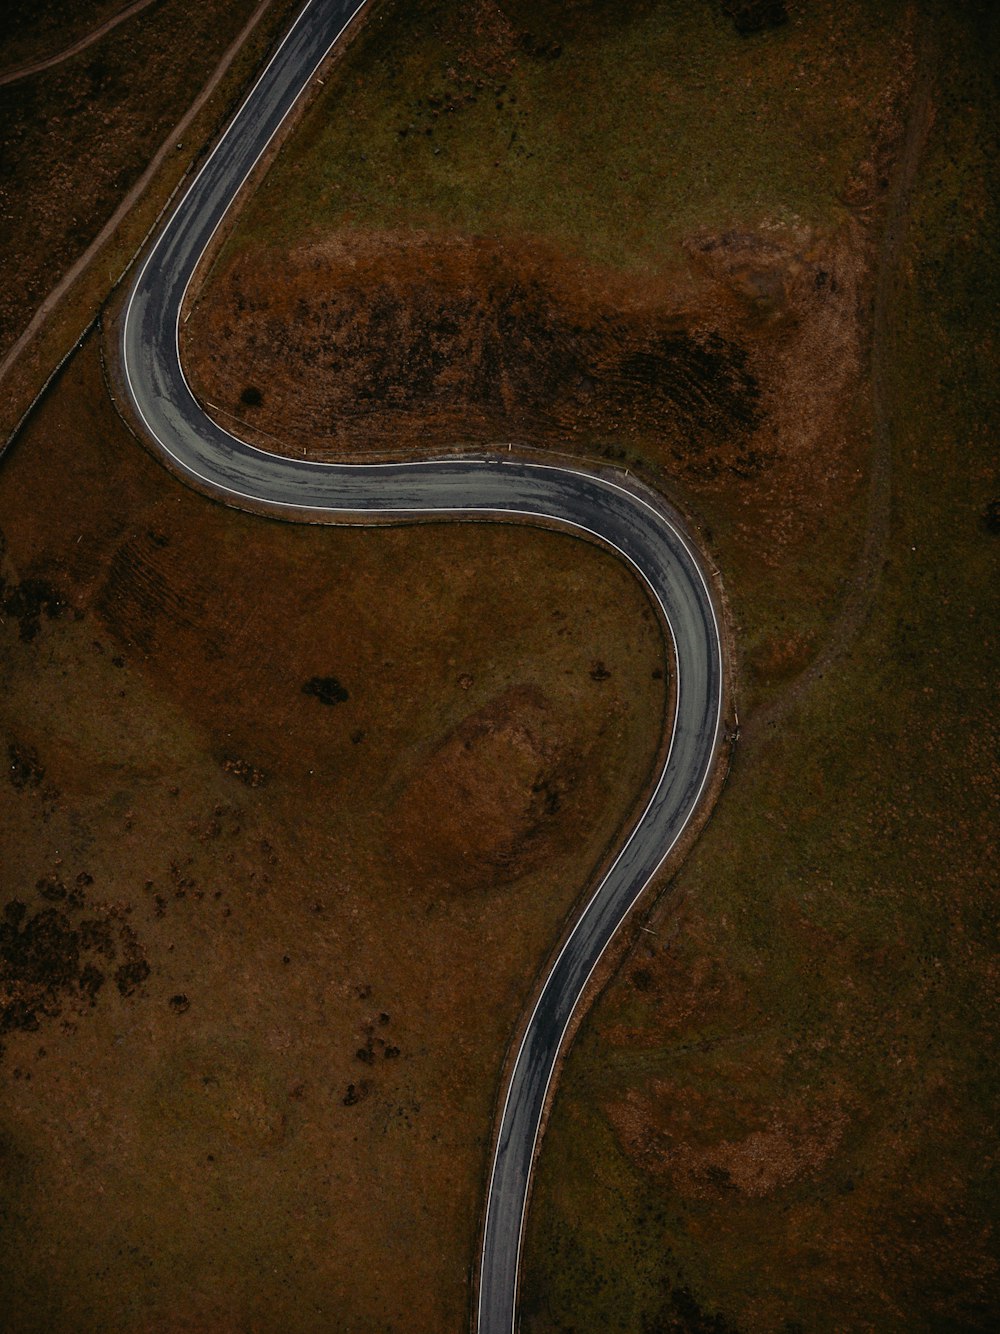 a winding road in the middle of a grassy area